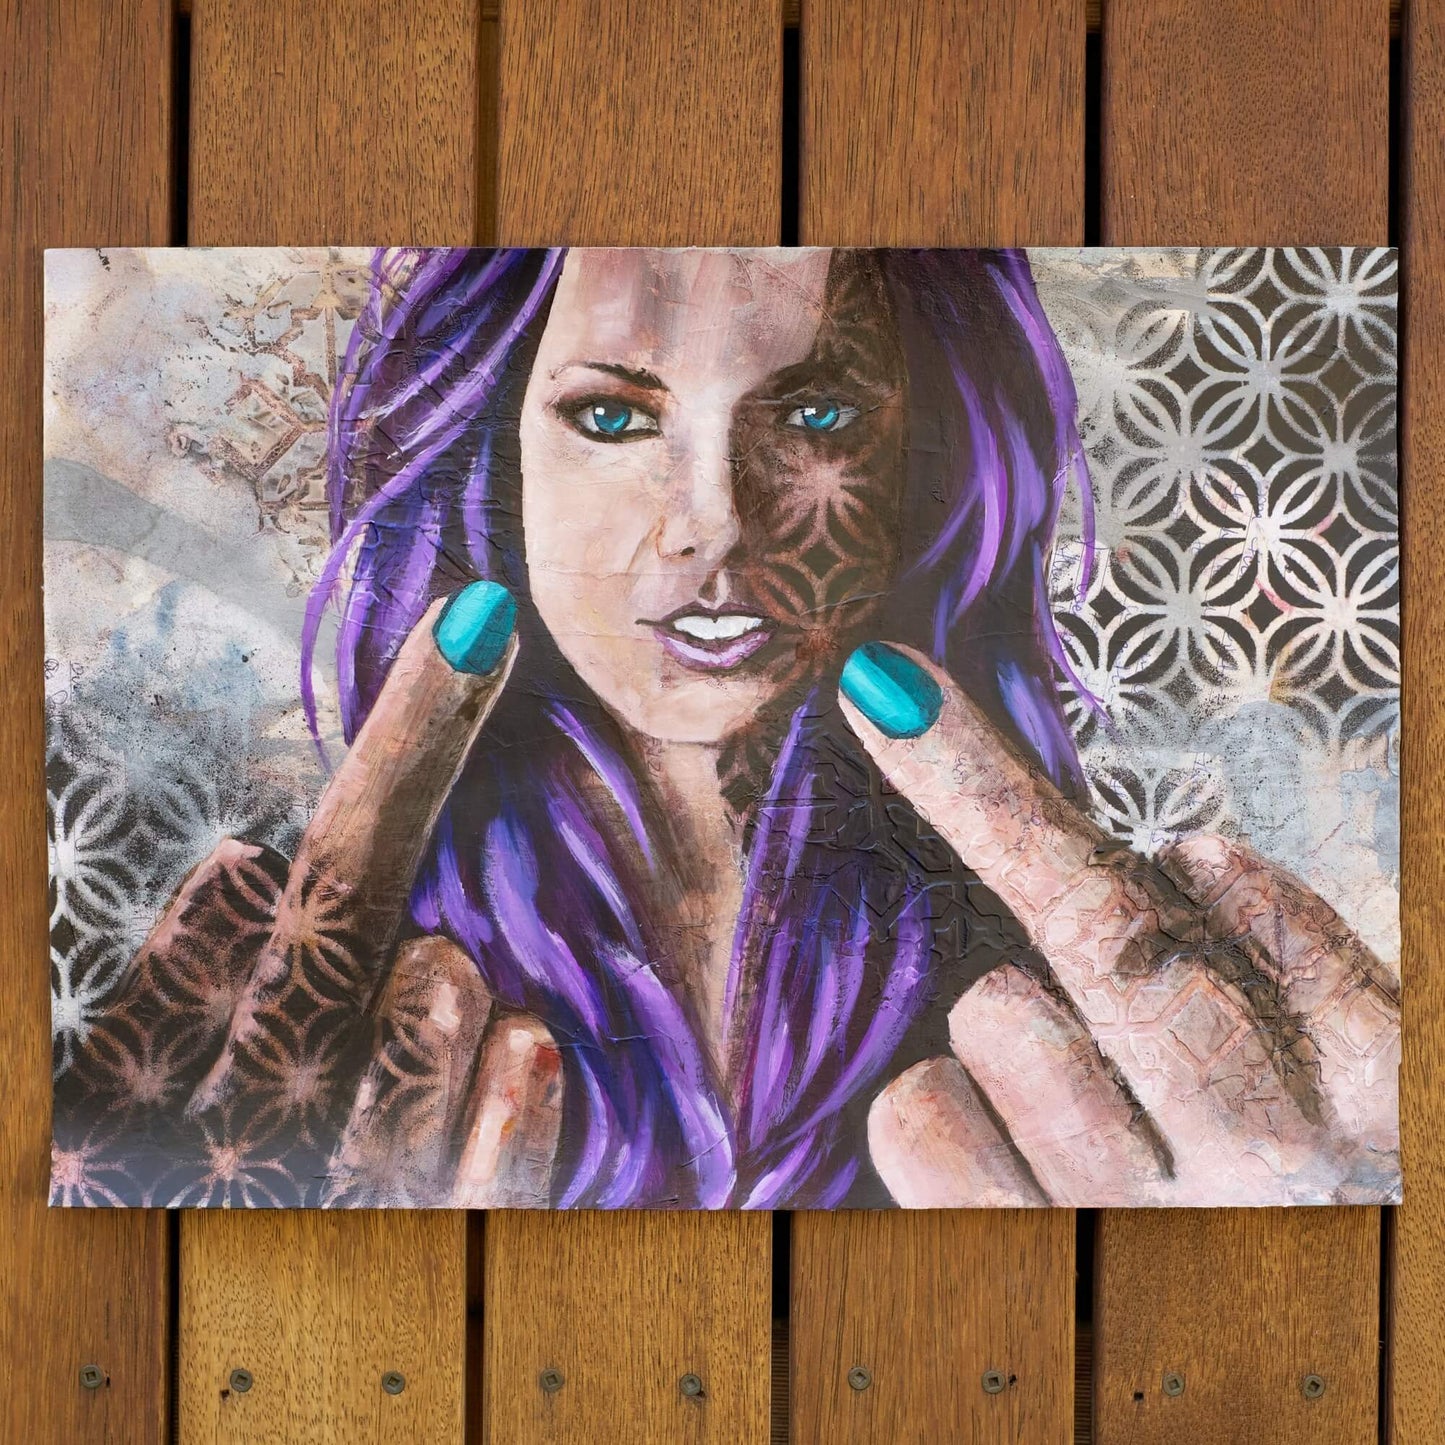 Abstract Art Paintings of Women with Attitude | Mixed Media Street Art Made in Melbourne